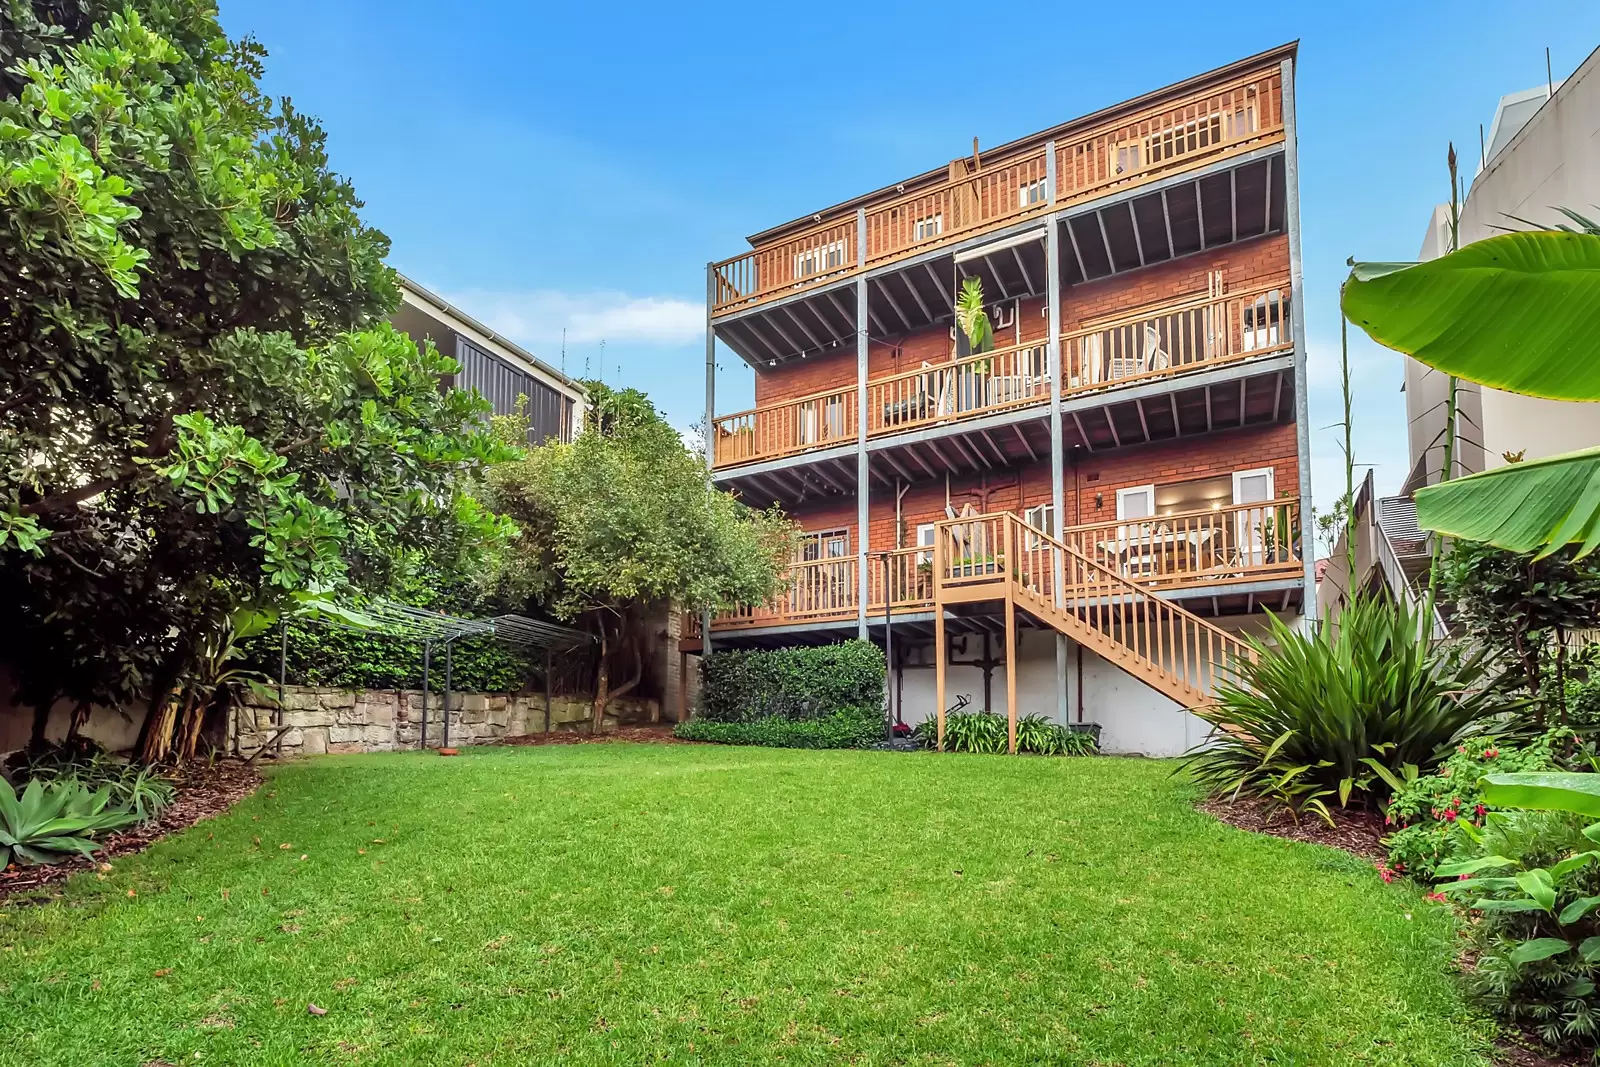 Photo #10: 7/157 Brook Street, Coogee - Sold by Sydney Sotheby's International Realty